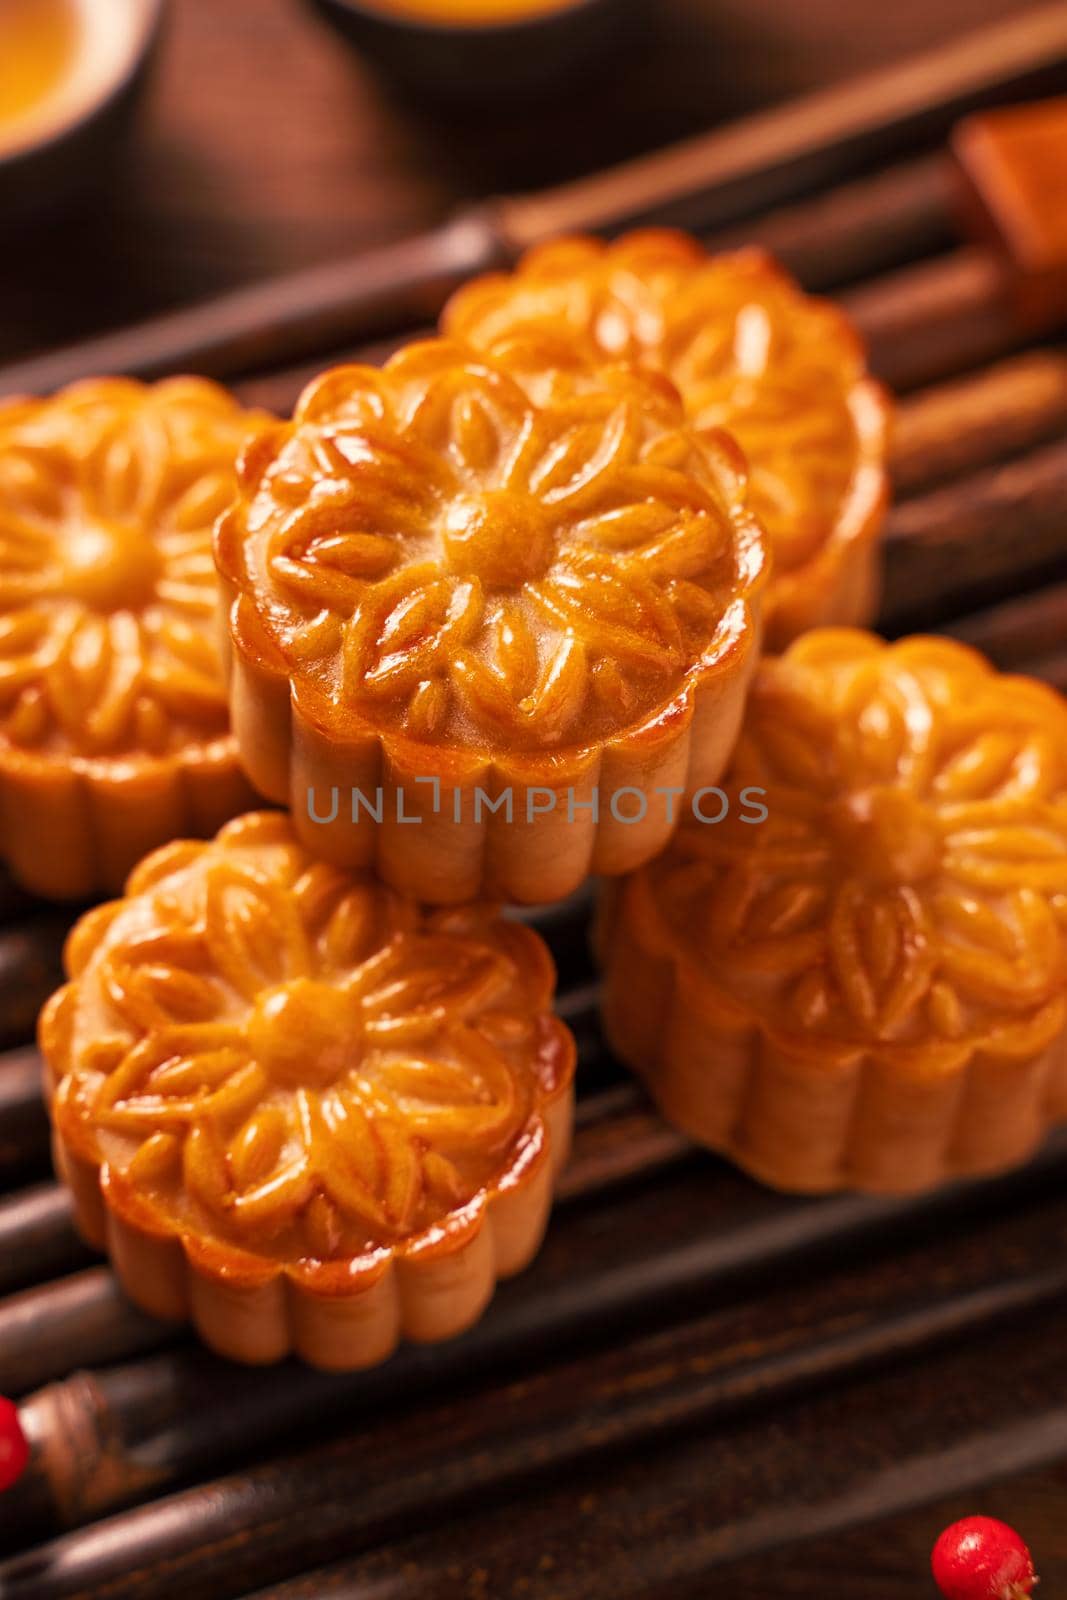 Moon cake Mooncake table setting - Round shaped Chinese traditional pastry with tea cups on wooden background, Mid-Autumn Festival concept, close up.